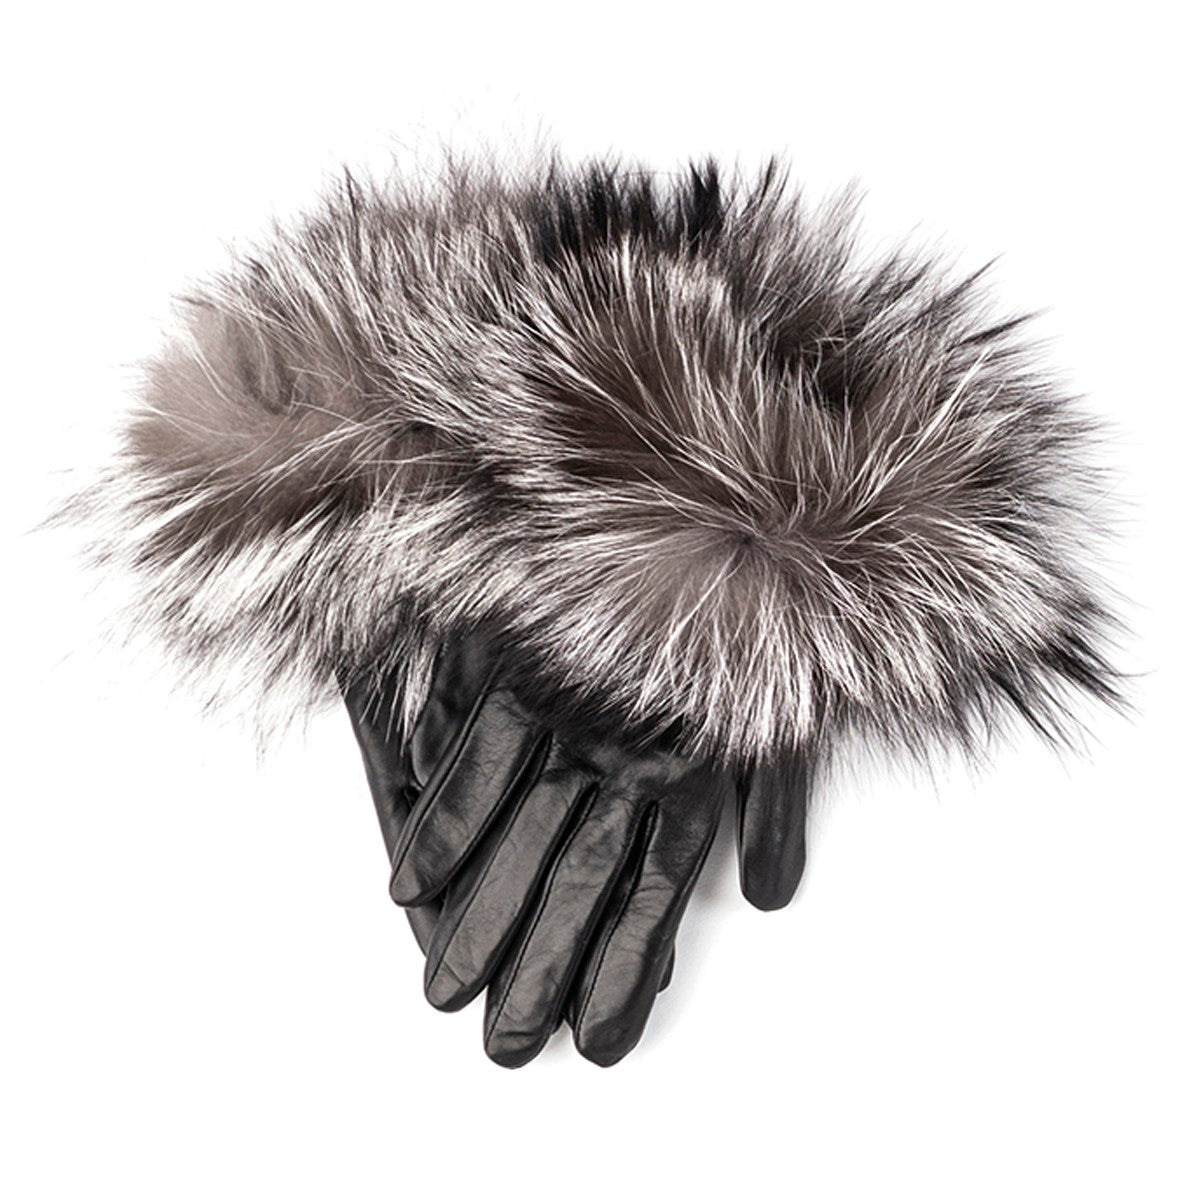 LEATHER GLOVES WITH UPCYCLED FUR GOLF  2179 BLACK-GREY L  